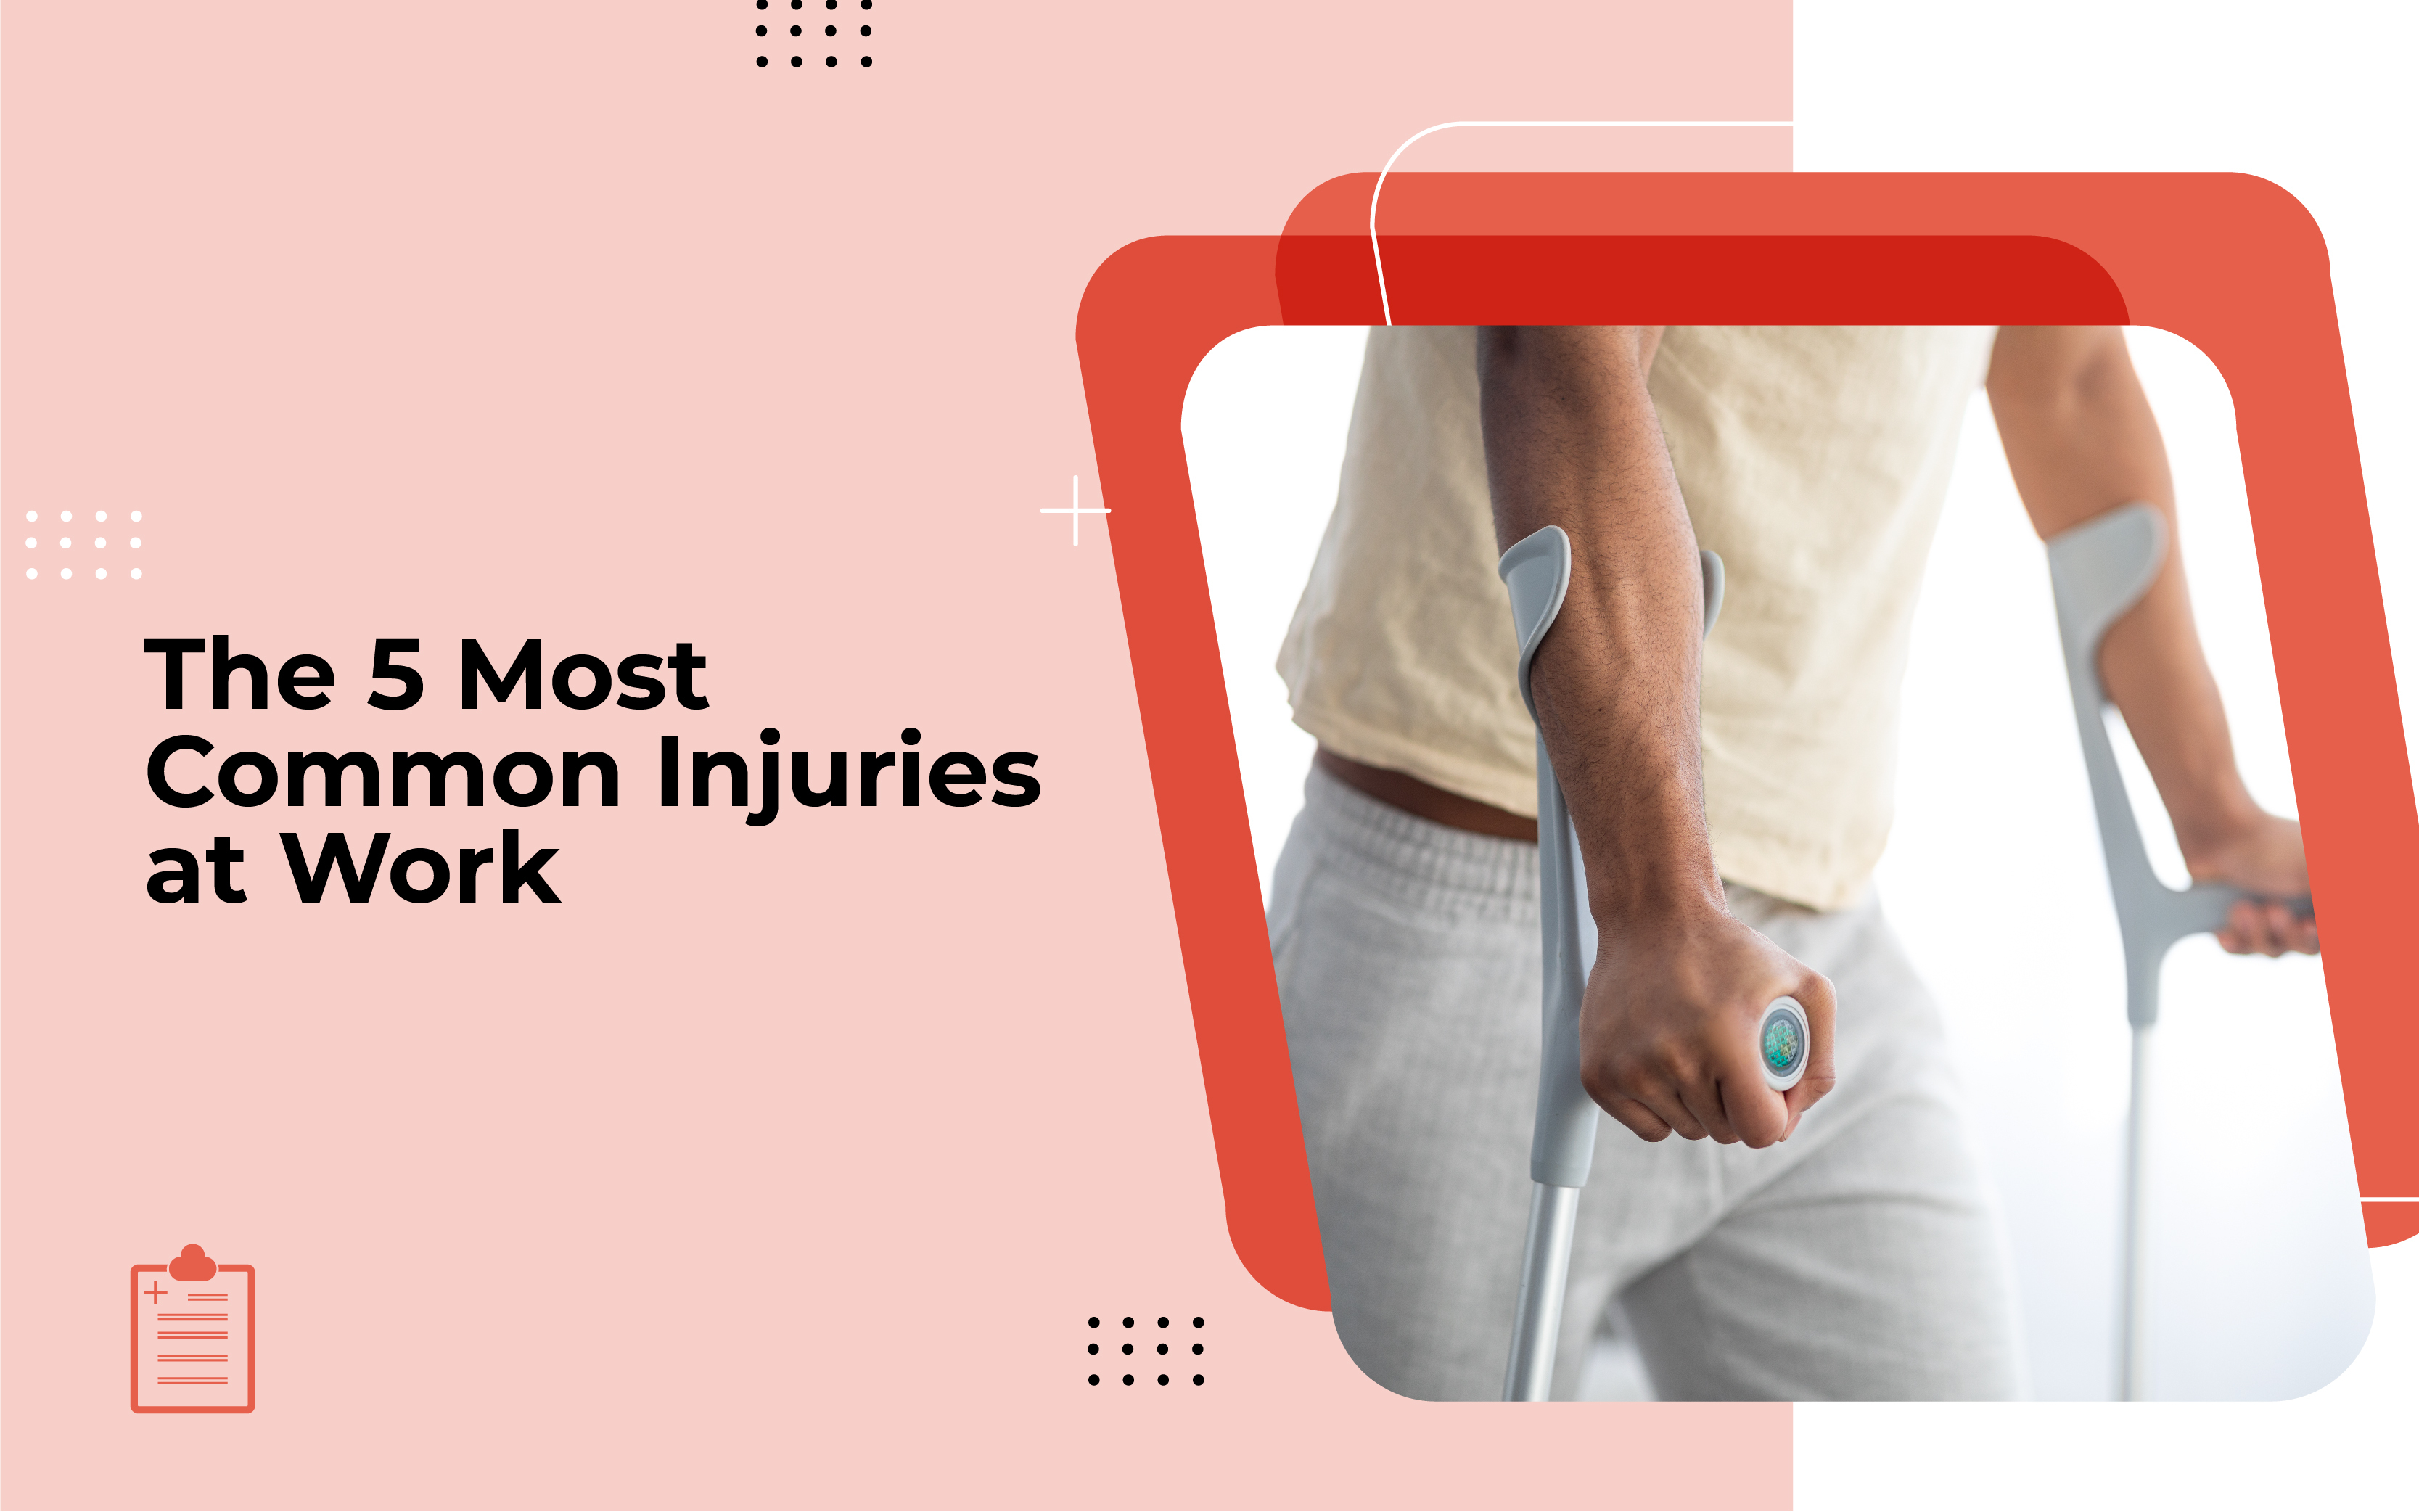 The 5 Most Common Injuries at Work